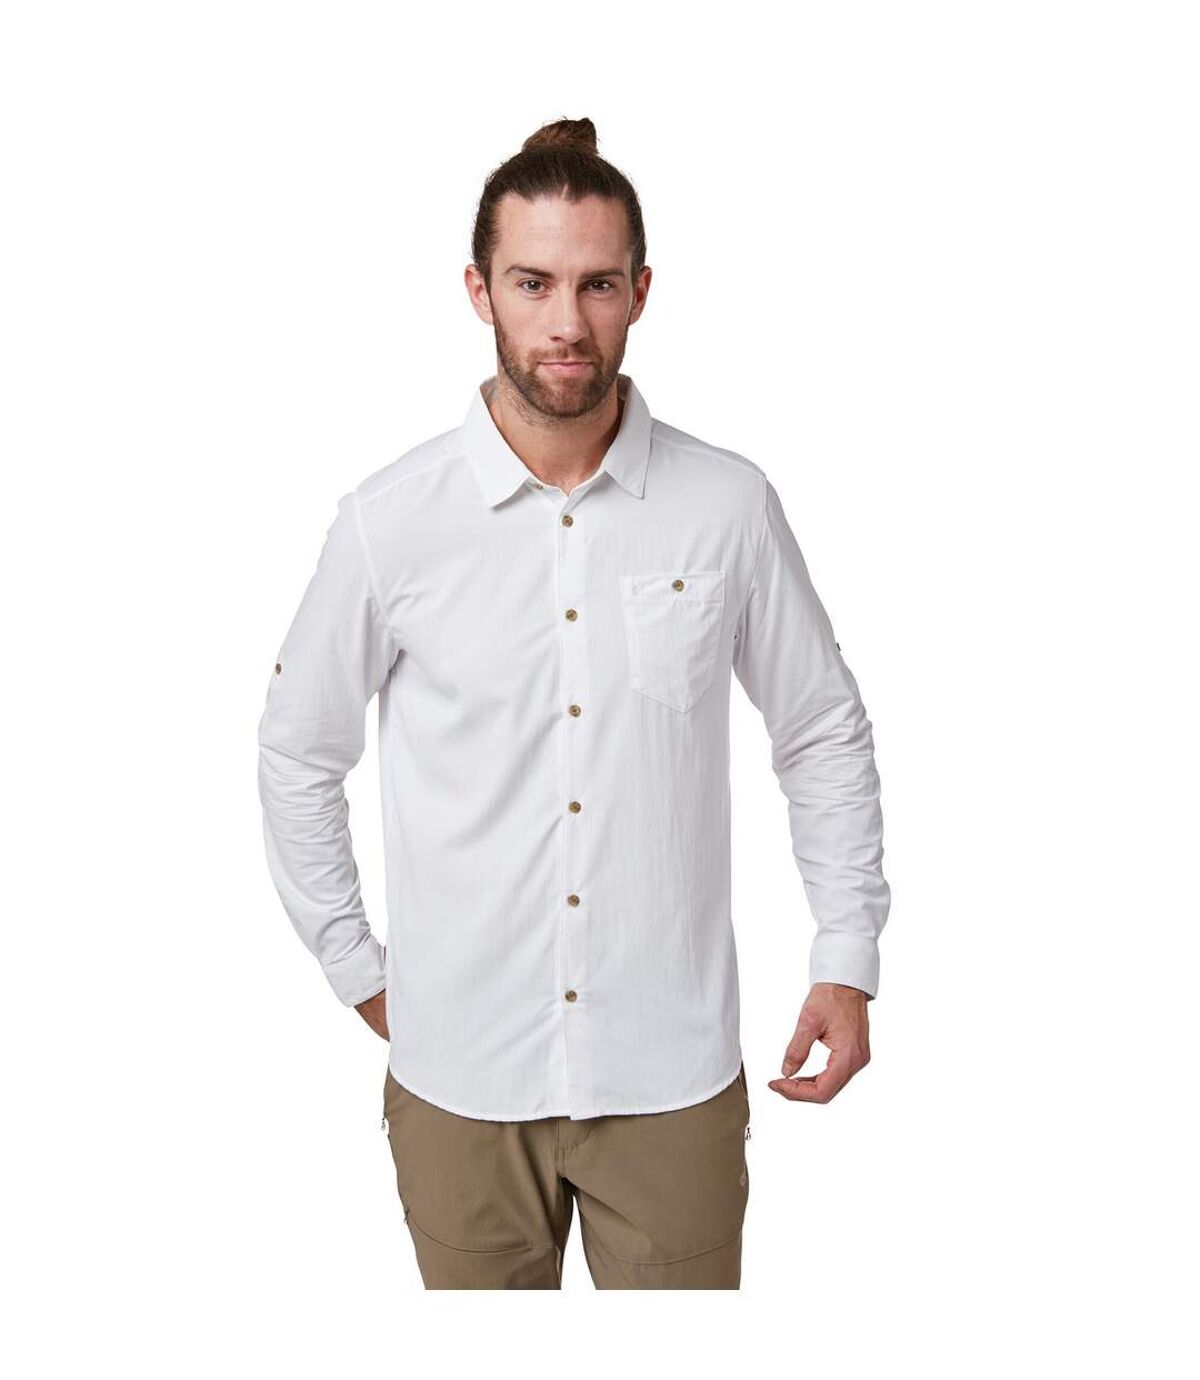 Craghoppers - Chemise manches longues NUORO - Homme (Blanc) - UTCG1119